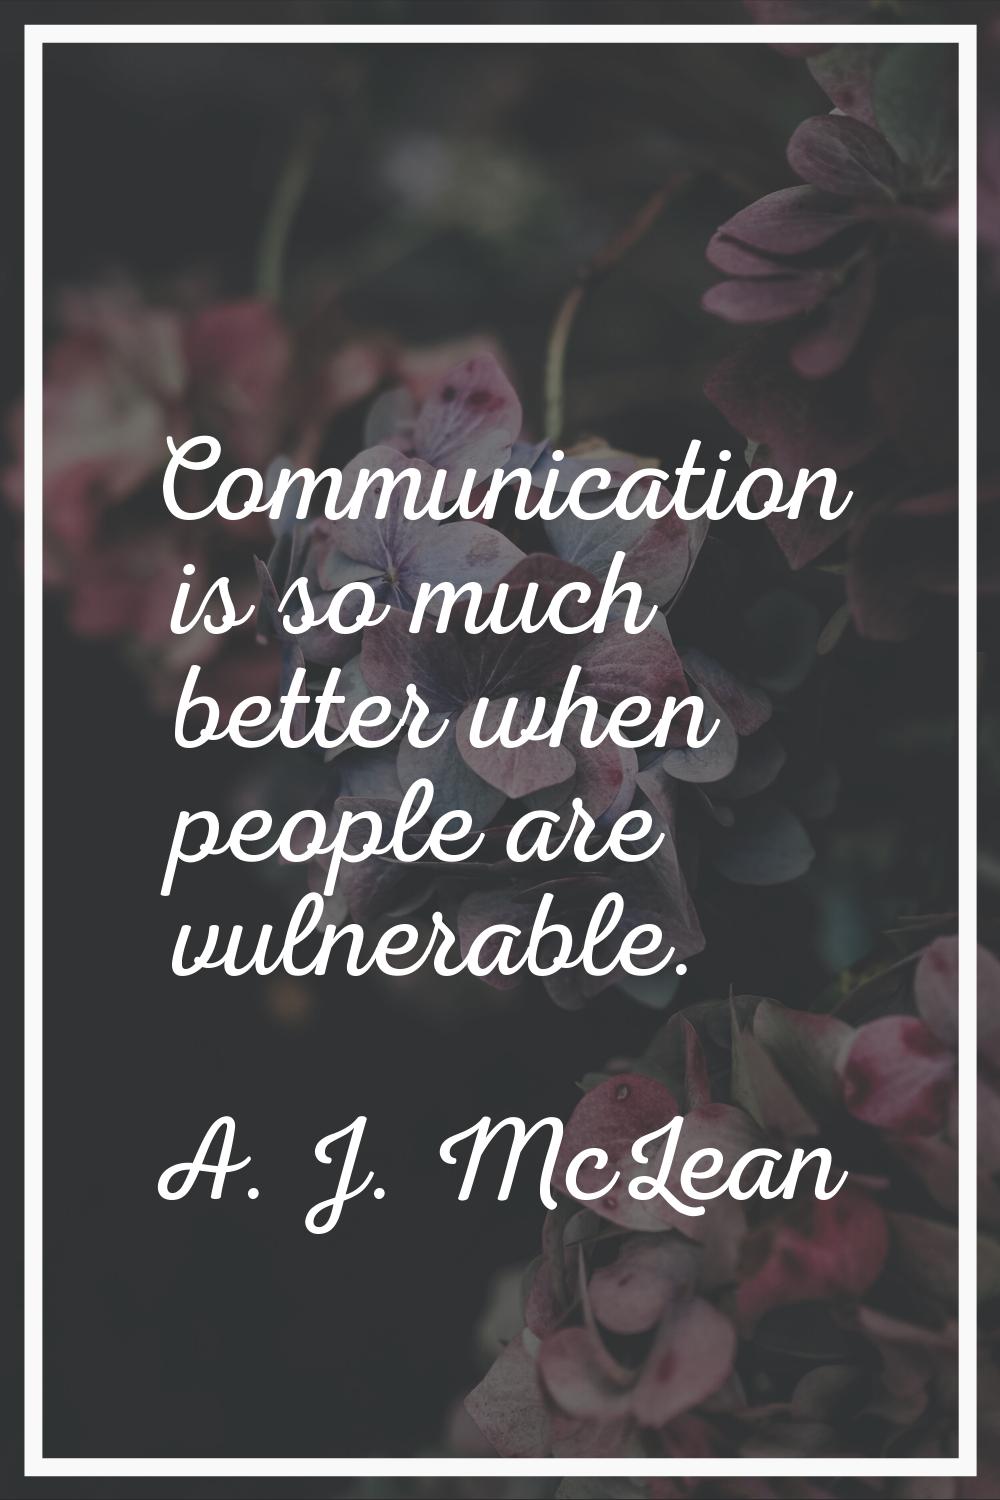 Communication is so much better when people are vulnerable.